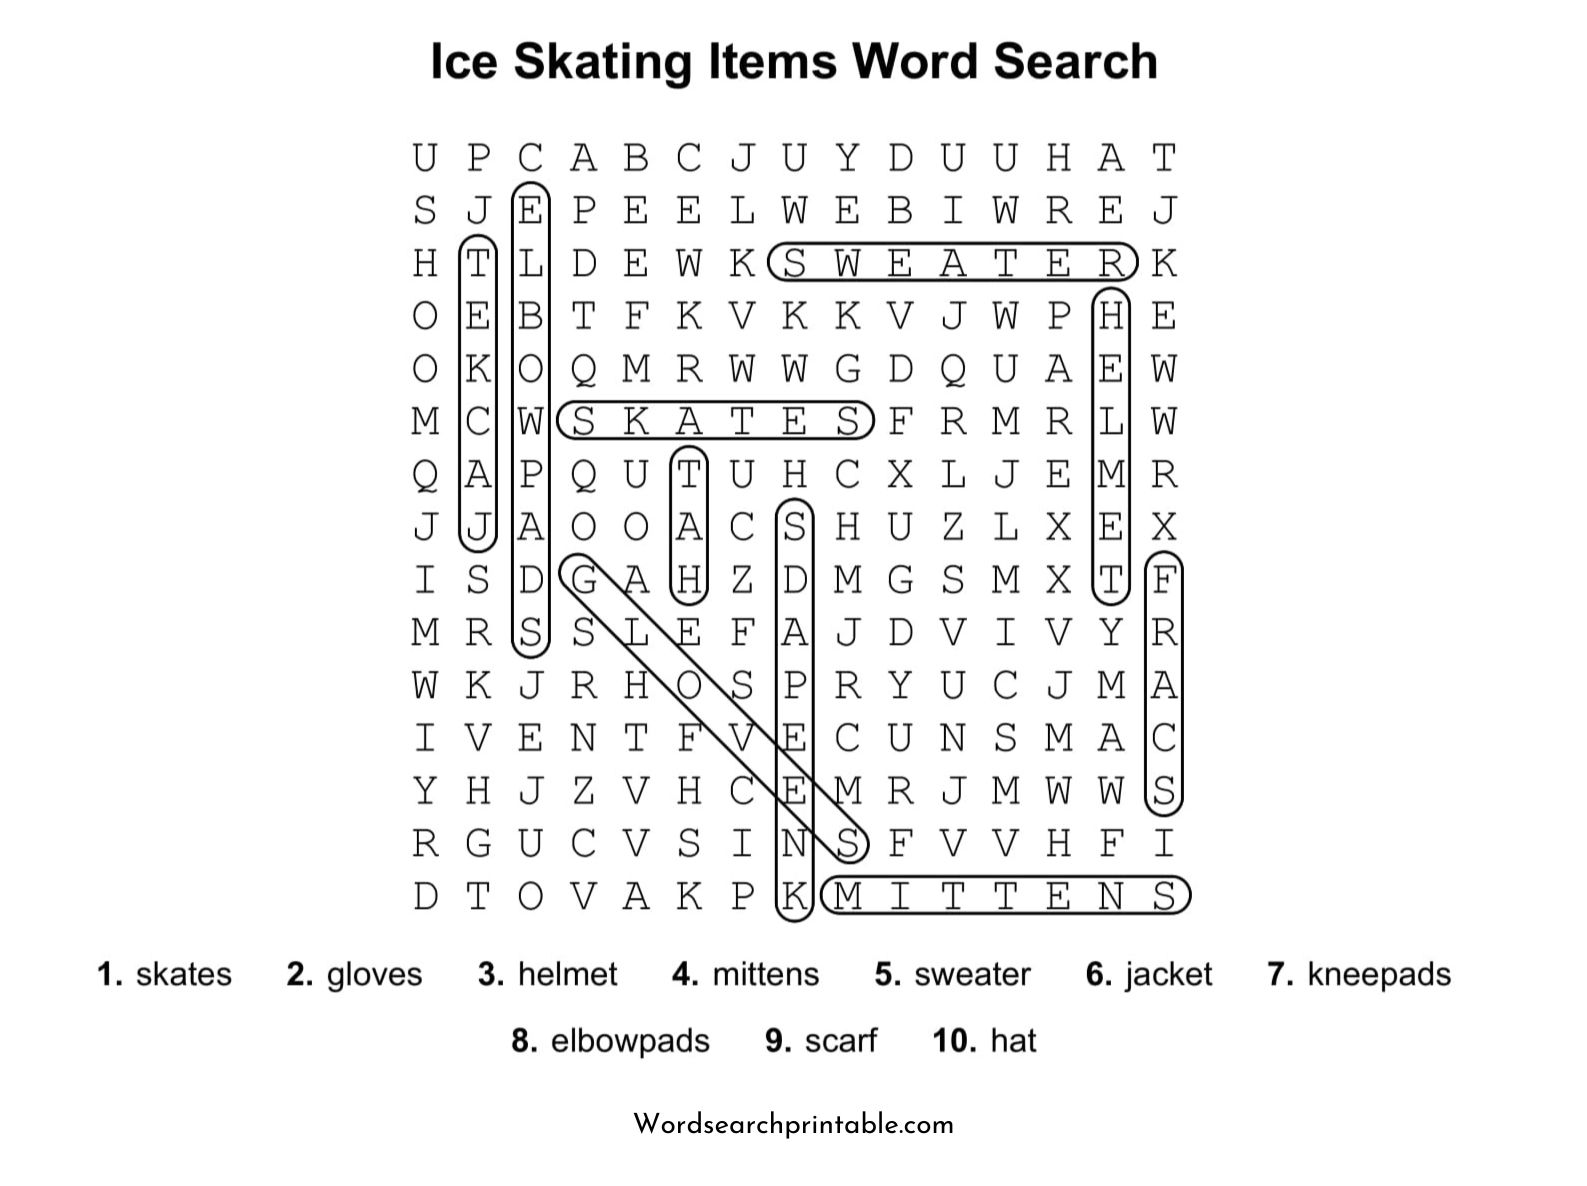 ice skating items word search puzzle solution